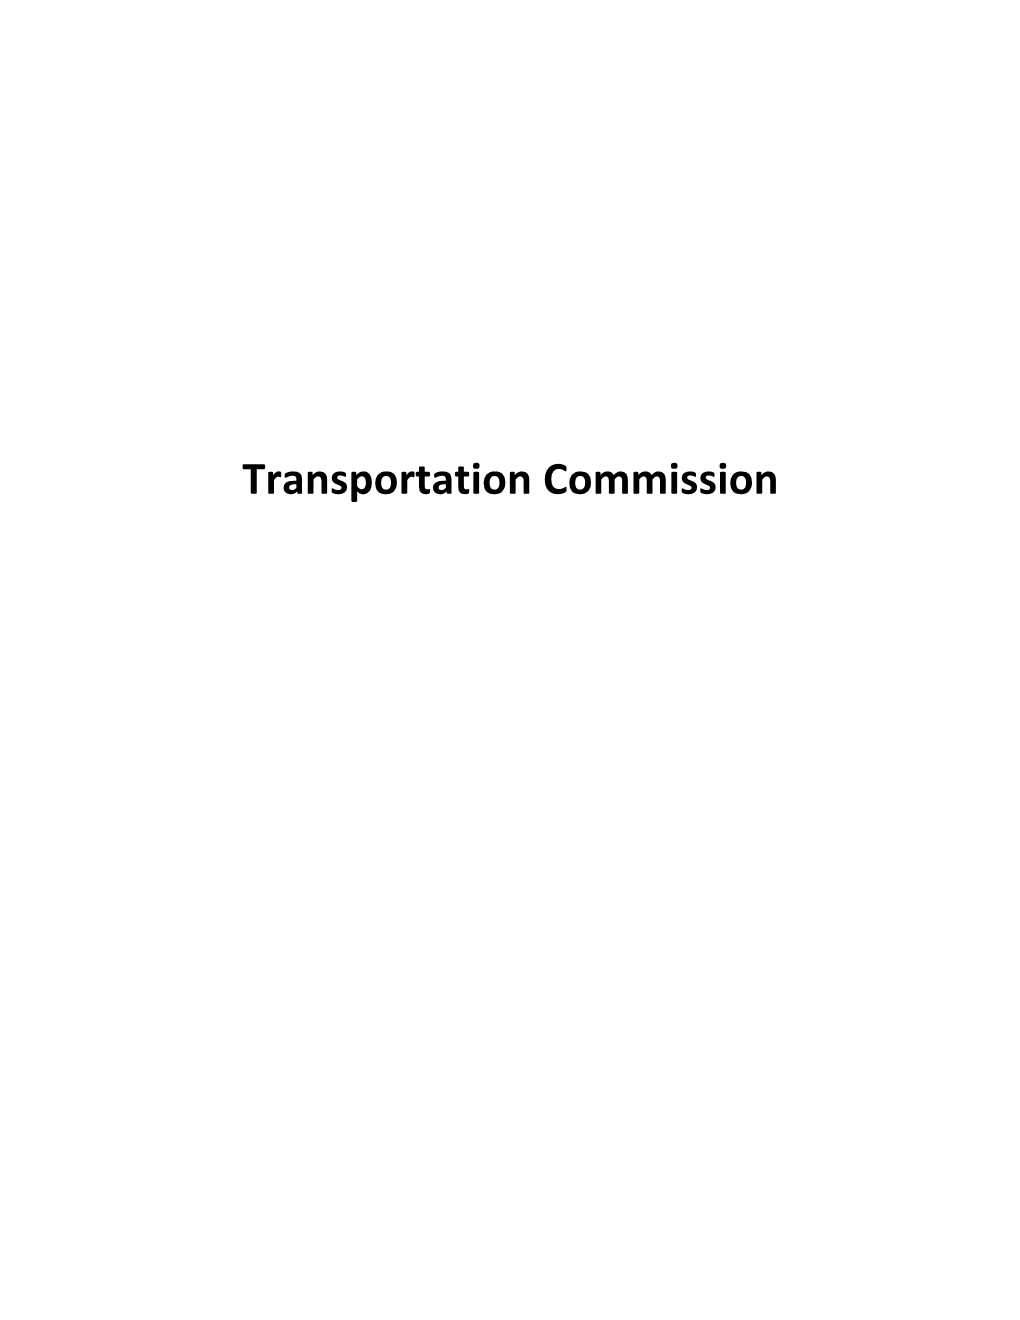 Transportation Commission City of Burbank Boards, Commissions & Committees Submit Date: May 03, 2021 Application Form